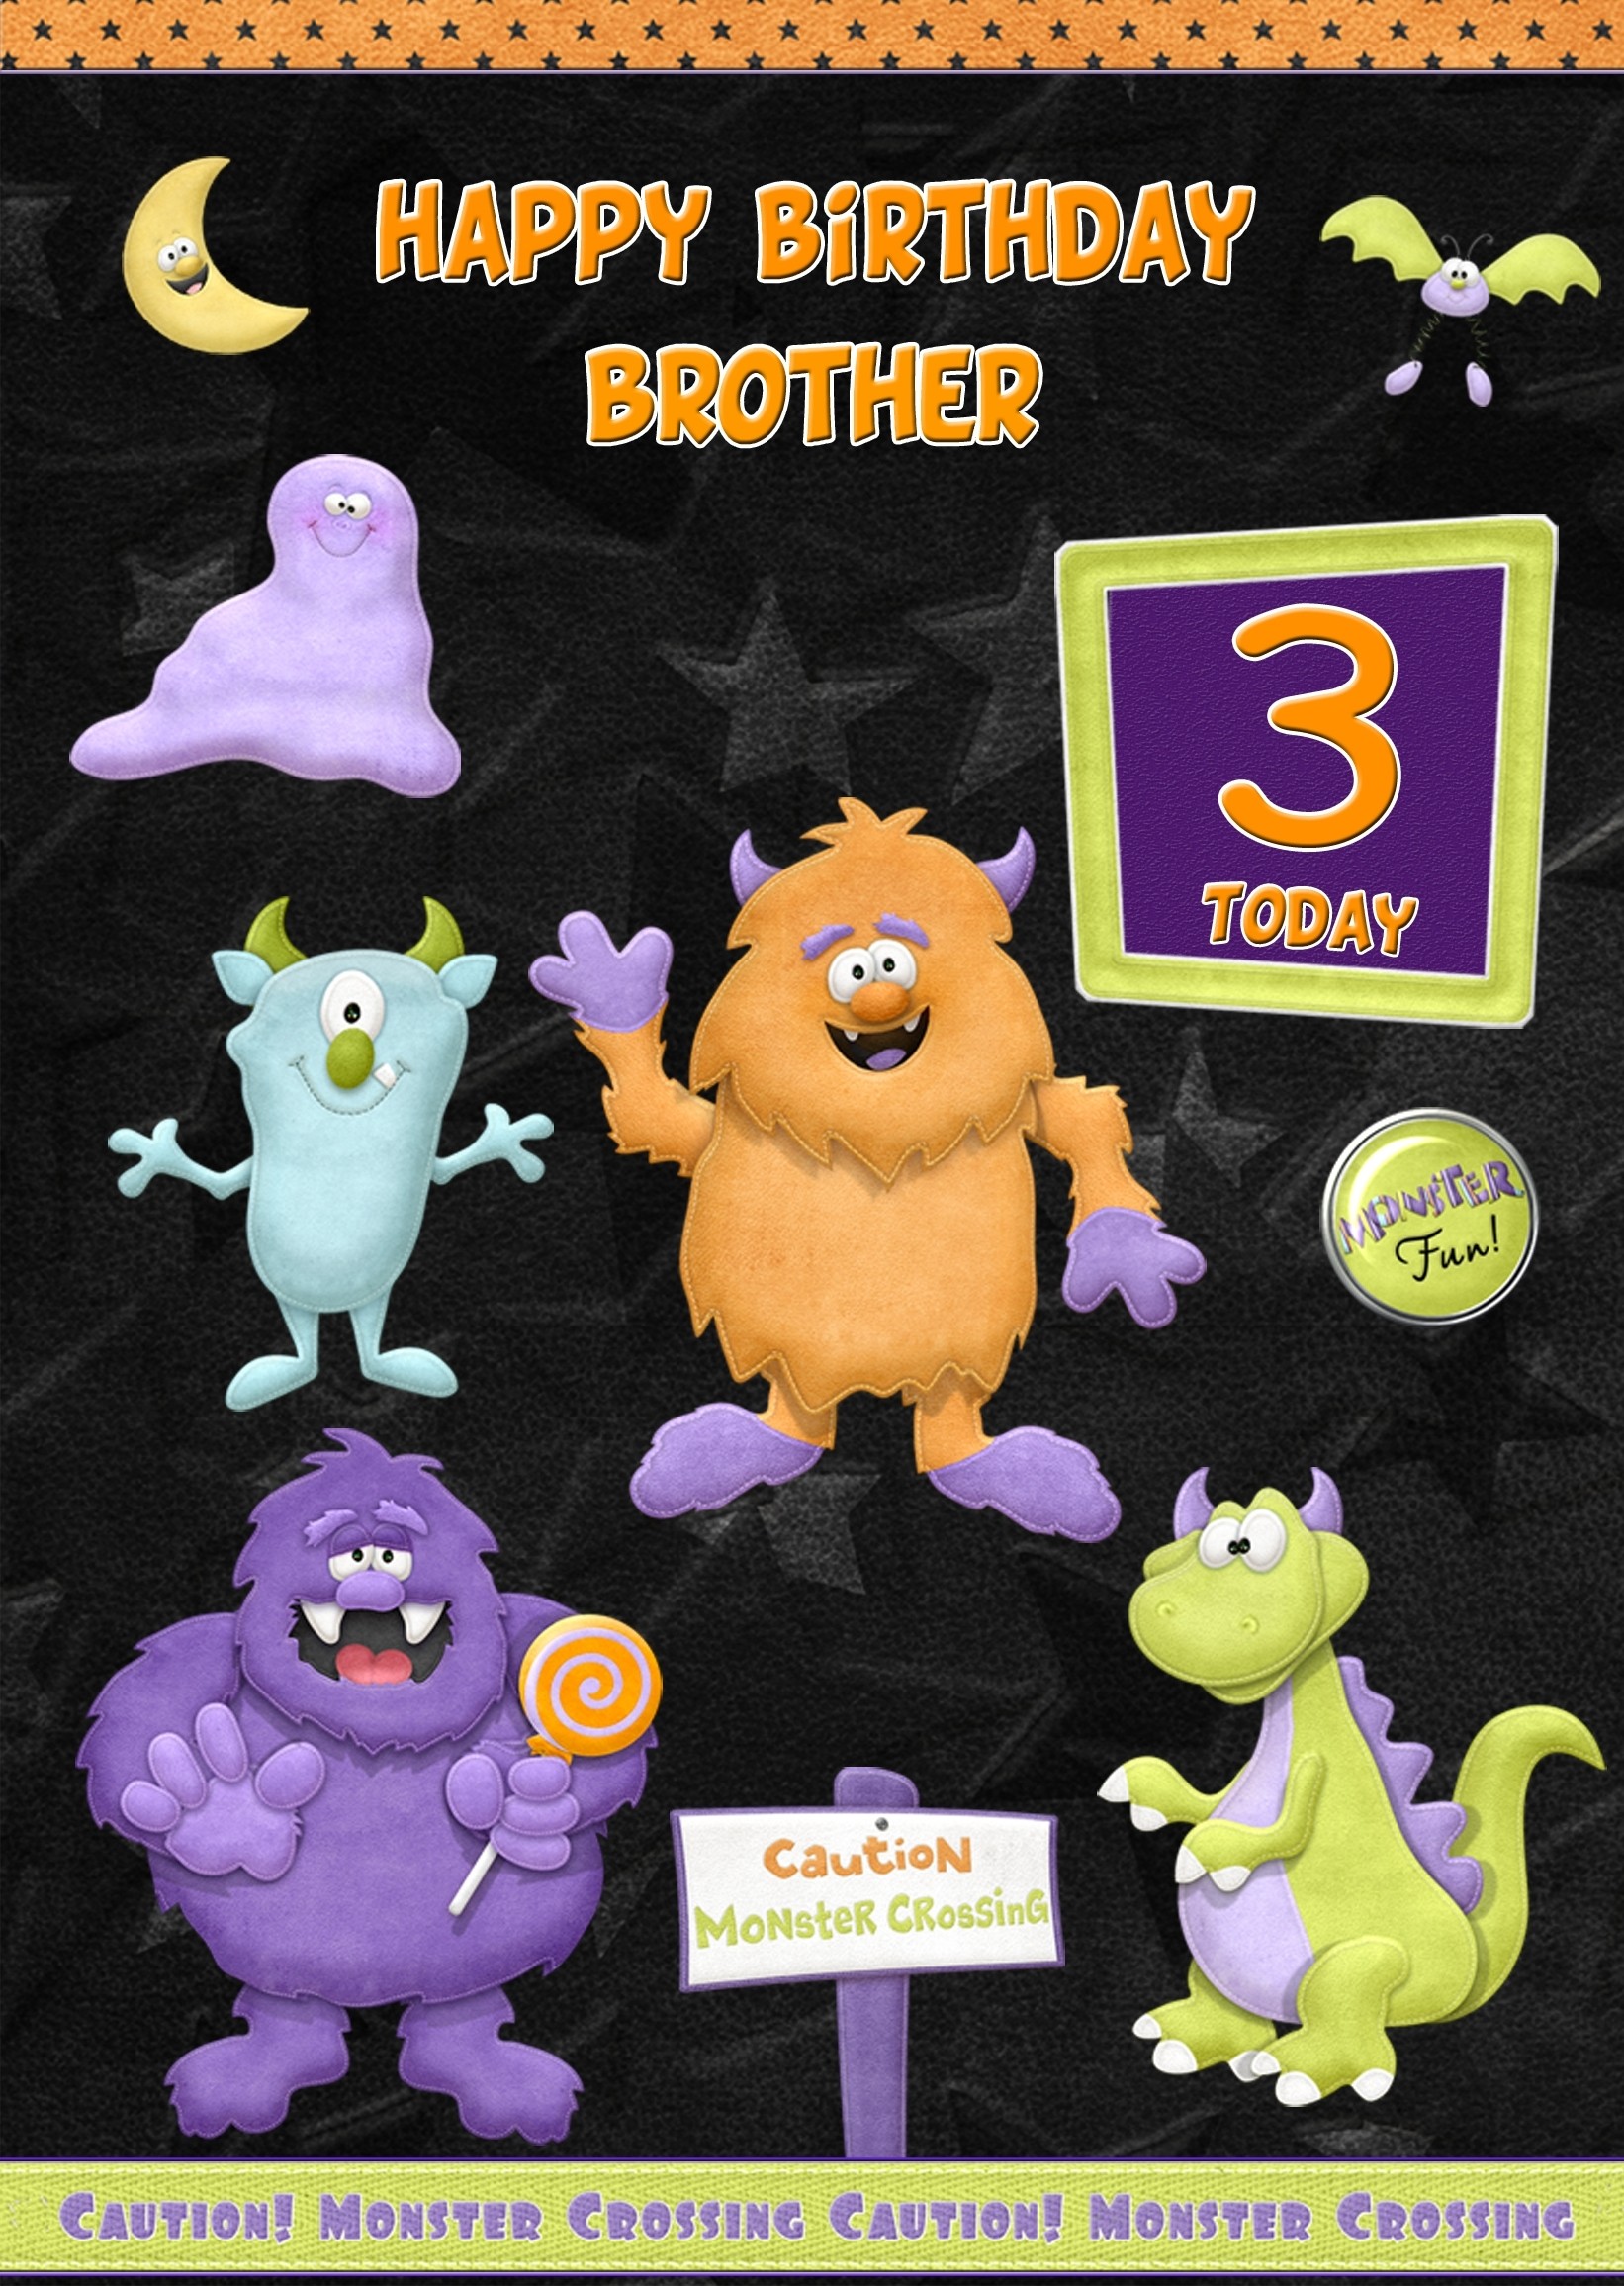 Kids 3rd Birthday Funny Monster Cartoon Card for Brother